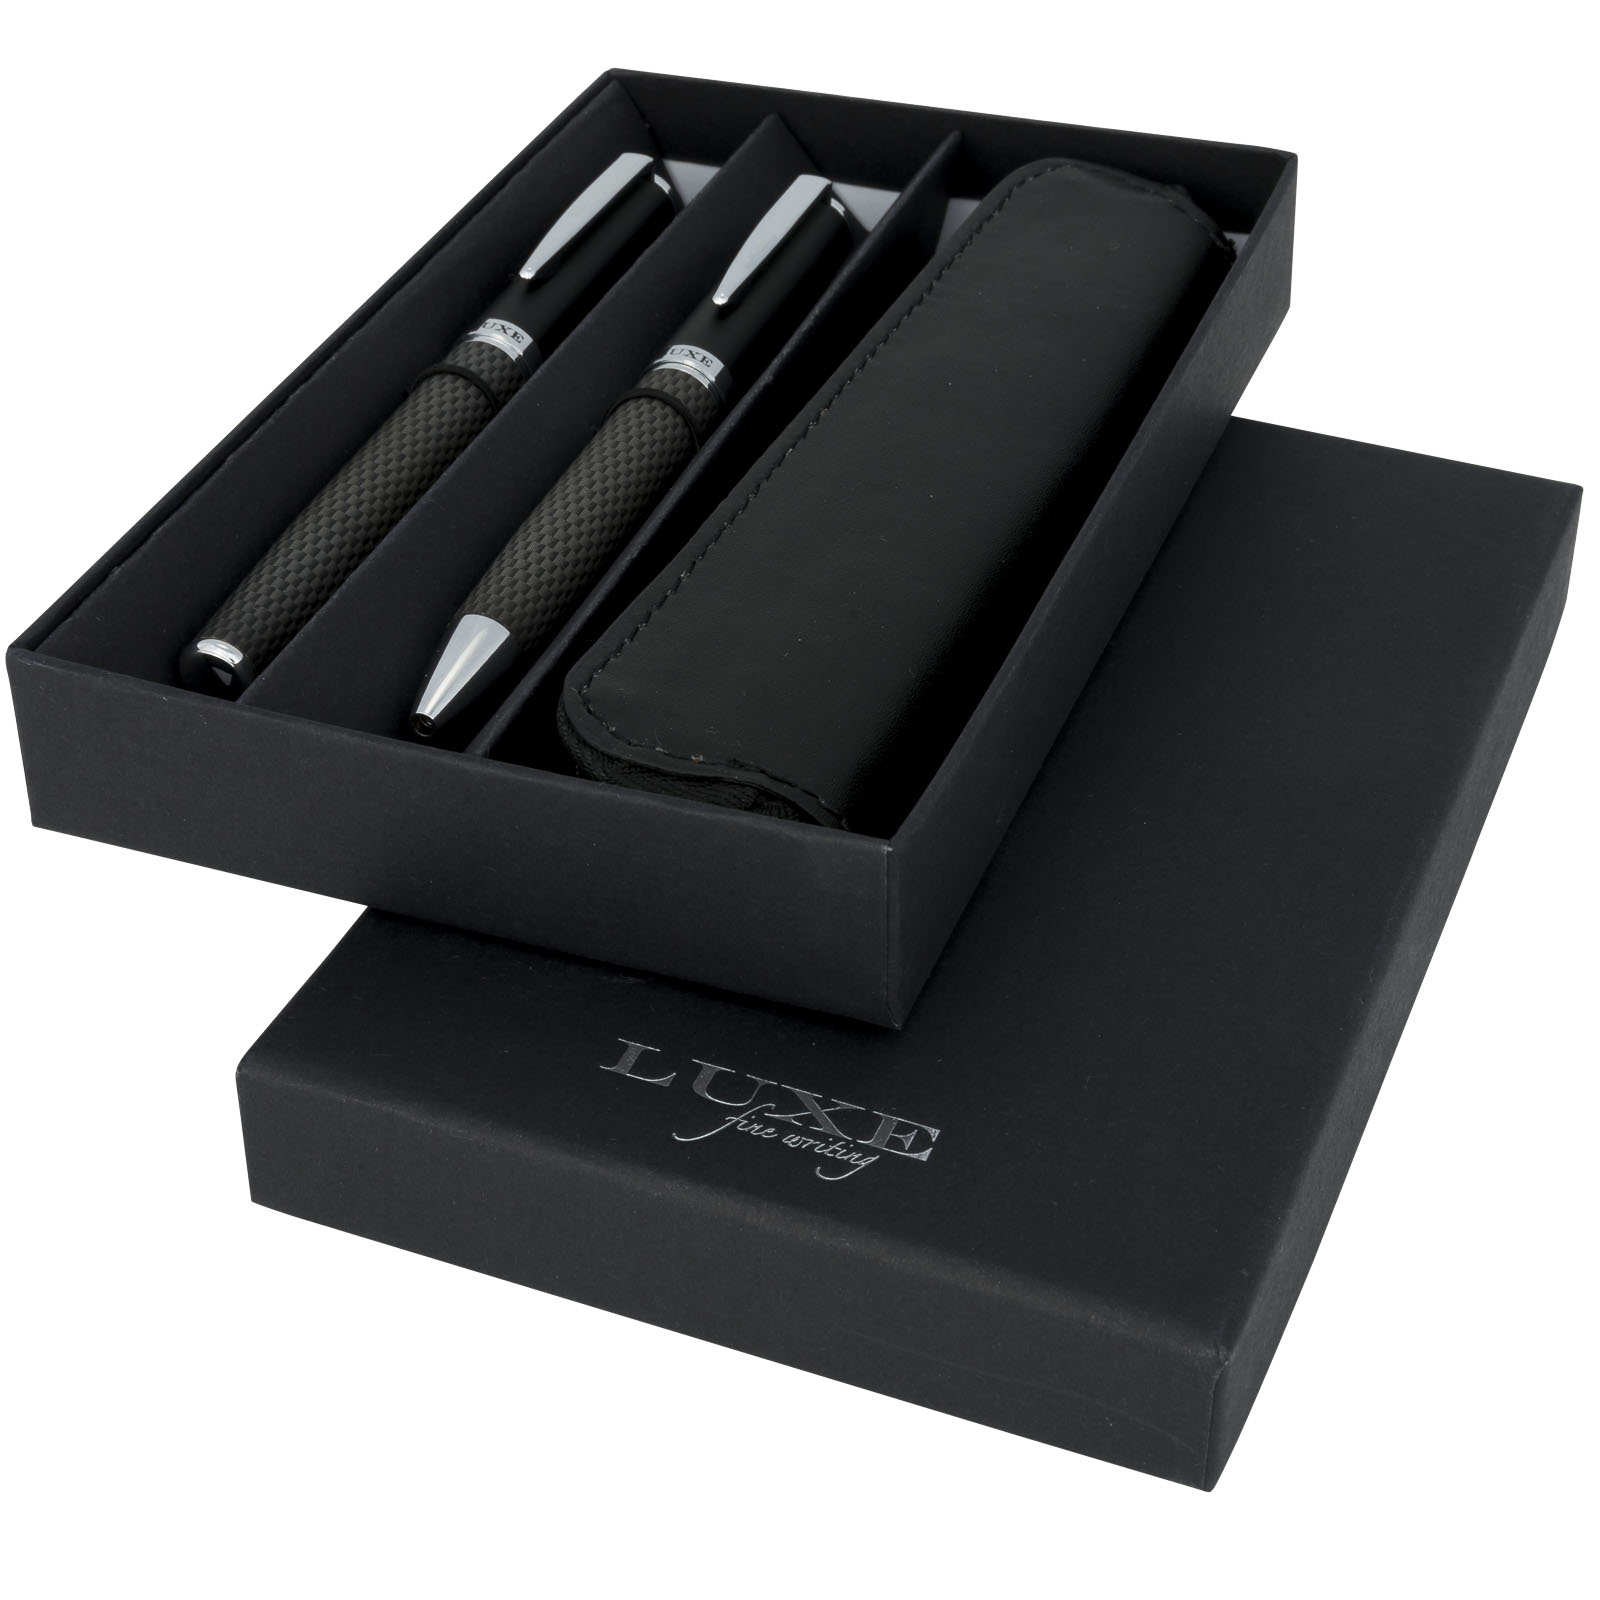 Gift sets - Carbon duo pen gift set with pouch